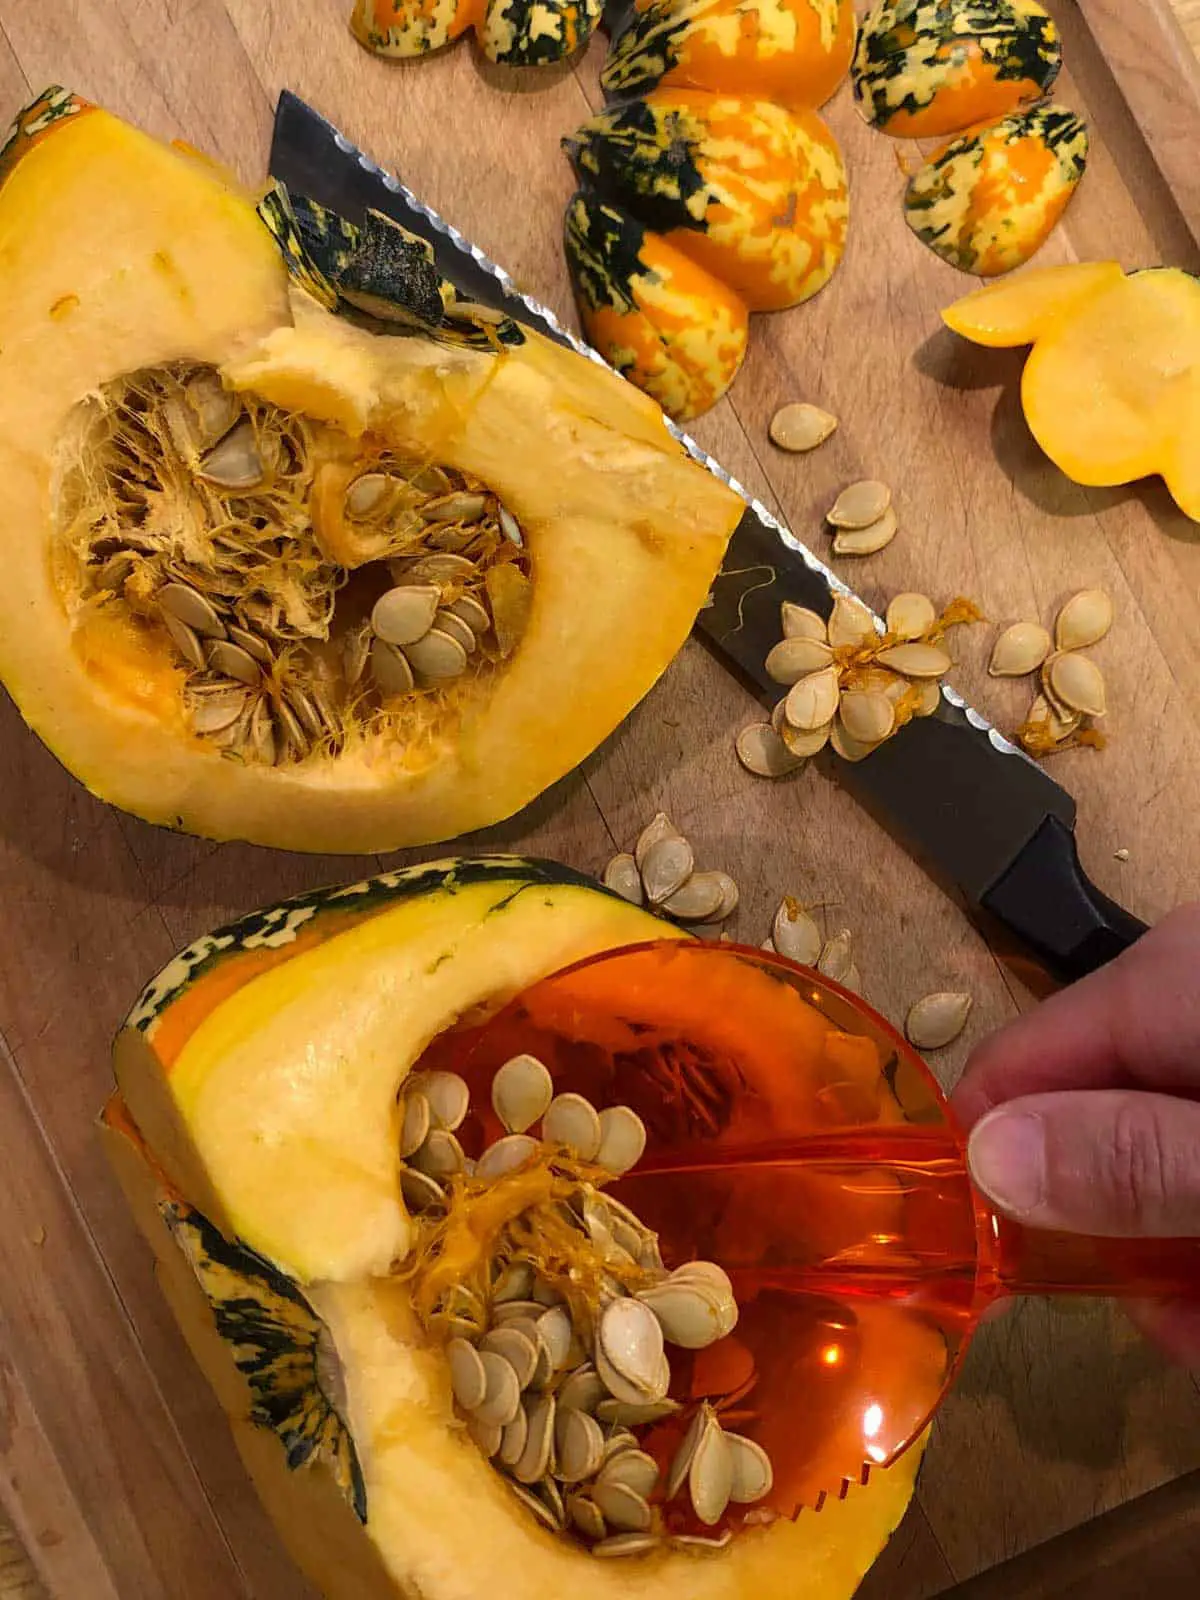 Carnival squash that has been split with a serrated knife next to it and a hand holding an orange scooper scooping out the seeds with additional seeds and cut parts of the squash laying next to the split halves.